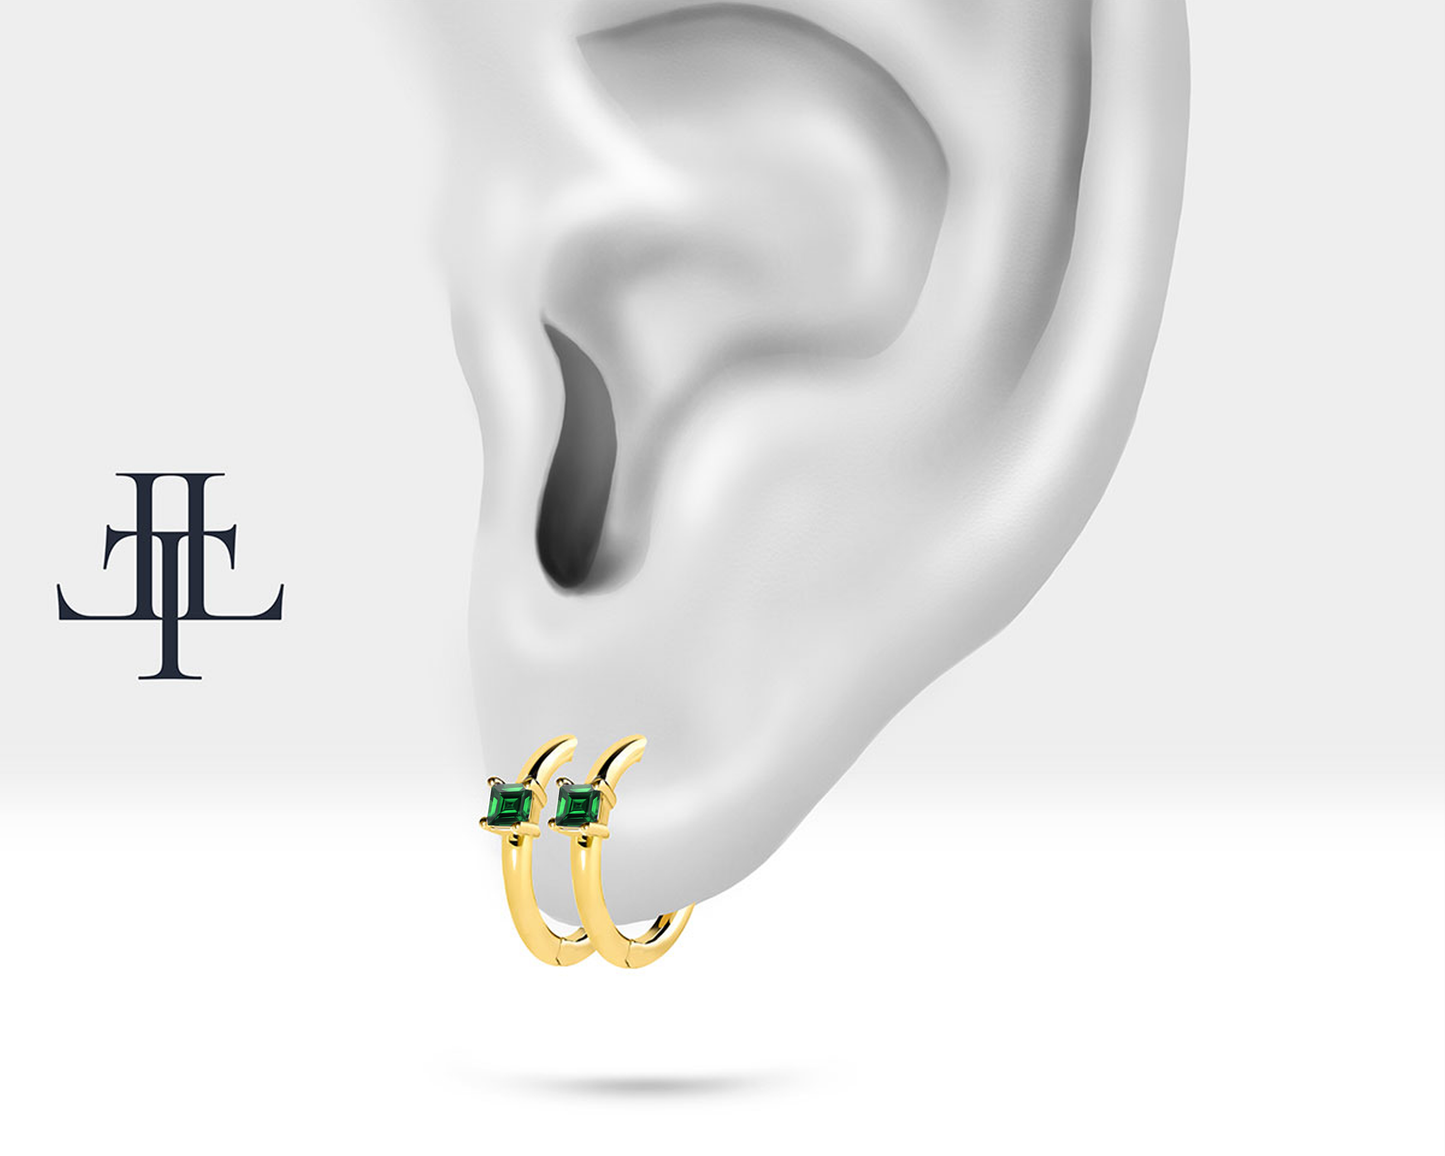 Cartilage Hoop with Princess Cut Emerald Earring in 14K Yellow Solid Gold Earlobe Earring 12mm